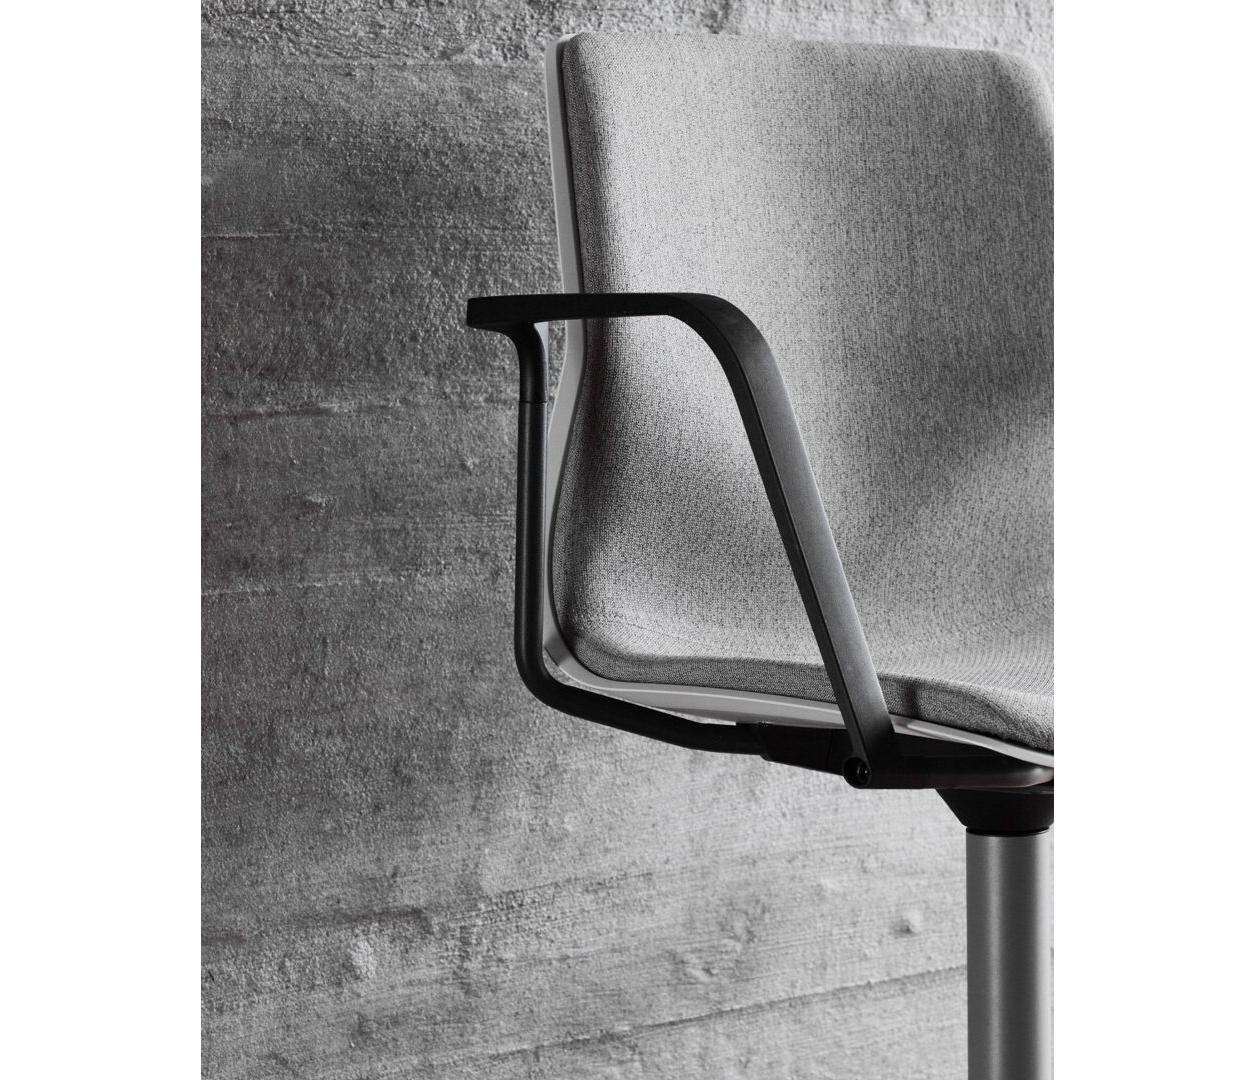 OCEE&FOUR – Chairs – FourSure 99 – Details Image 2 Large